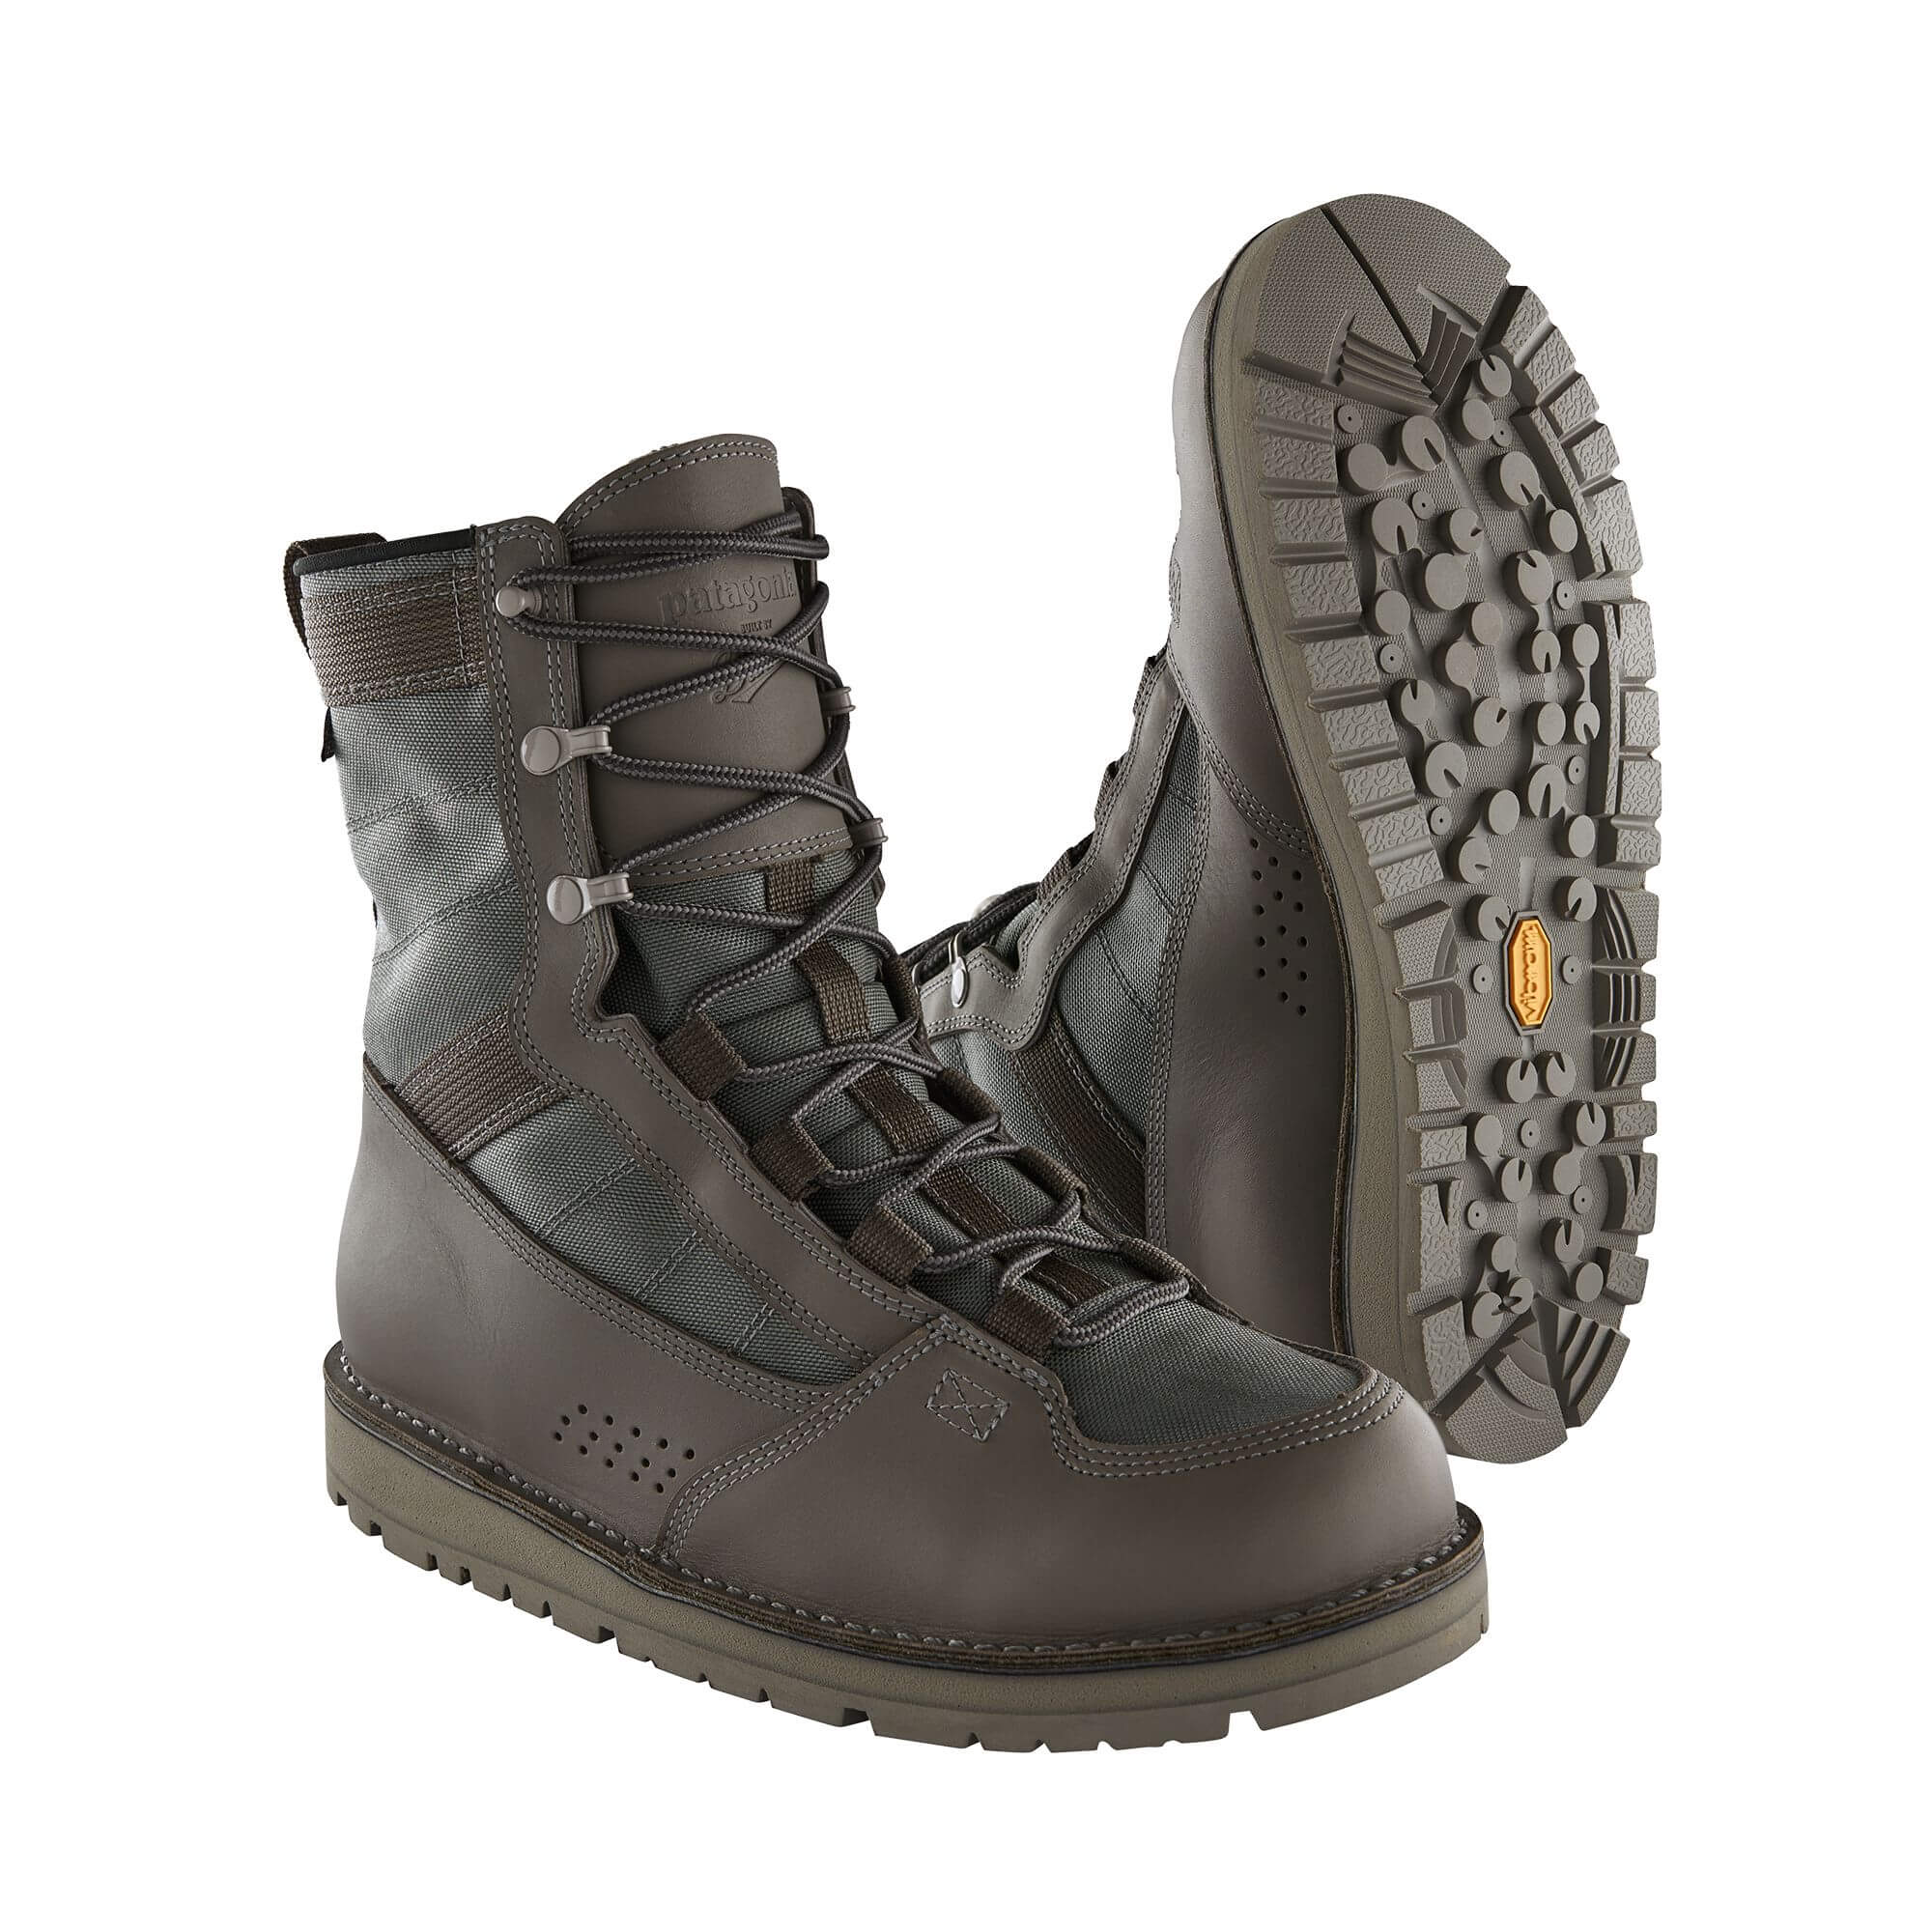 Patagonia River Salt Wading Boot (by Danner) - 6